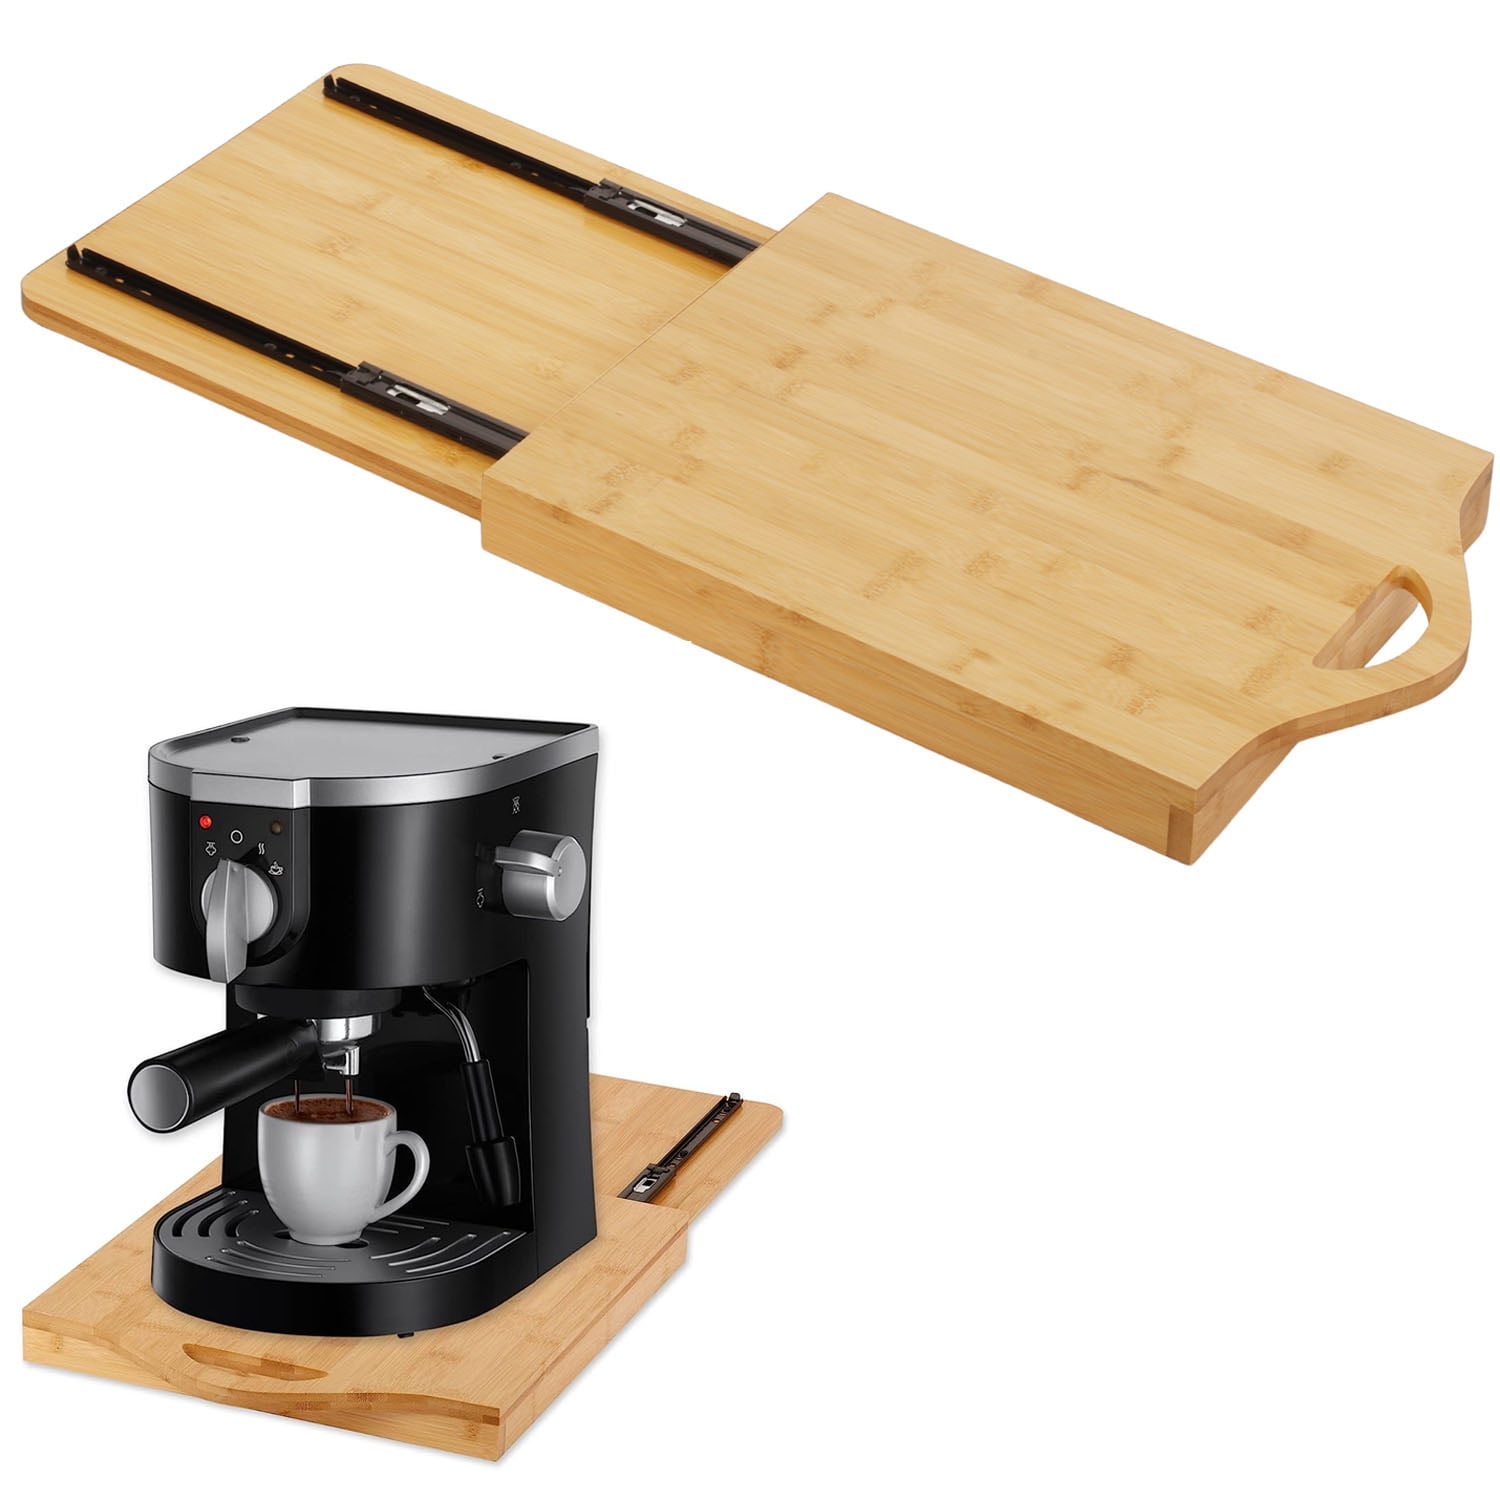 Large Appliance Sliders for Kitchen Appliances - Bamboo Sliding Tray  Compatible with Keurig Coffee Maker, Small Appliance Slider Tray for Coffee